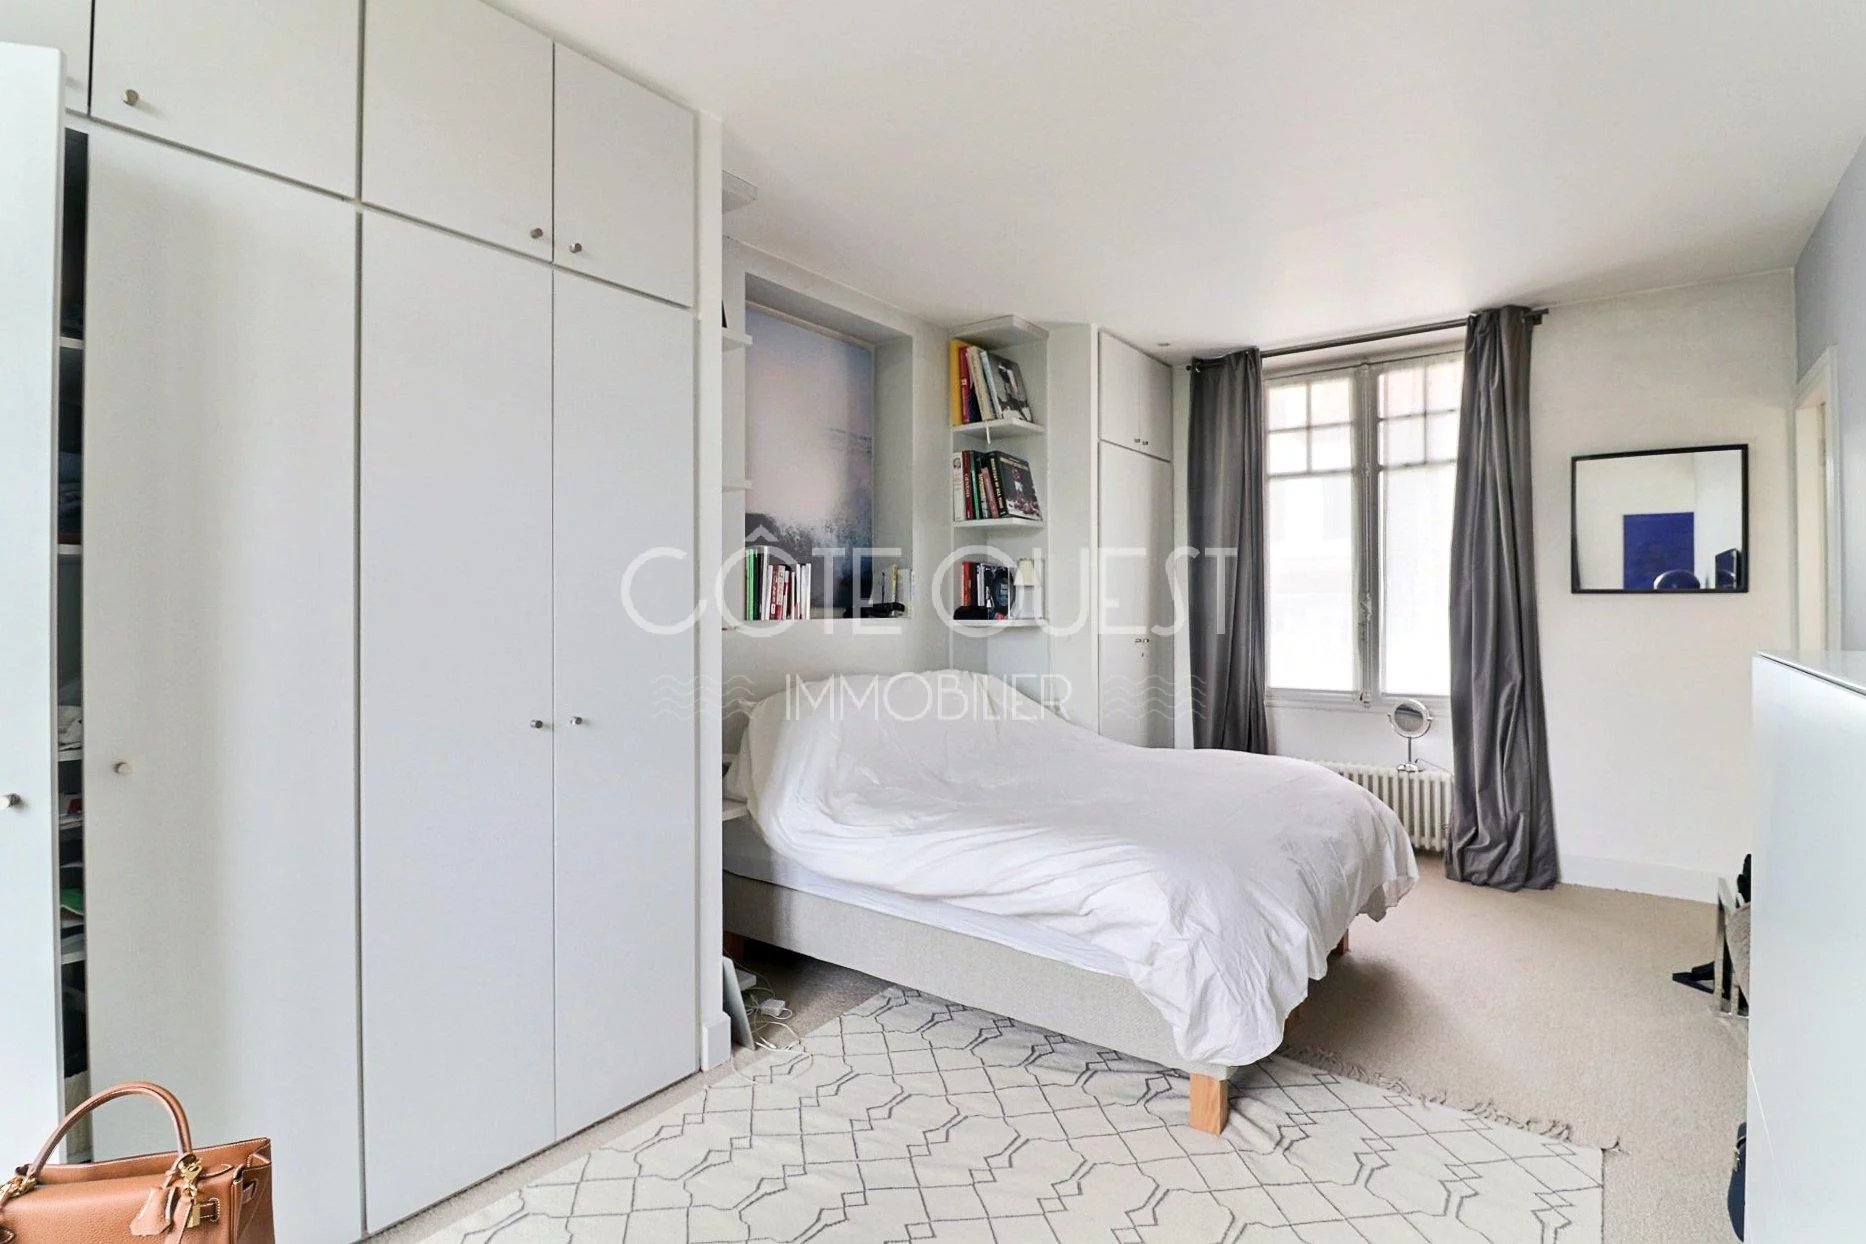 BIARRITZ - A 250 SQM TOWNHOUSE WITH ITS CHARMING GARDEN